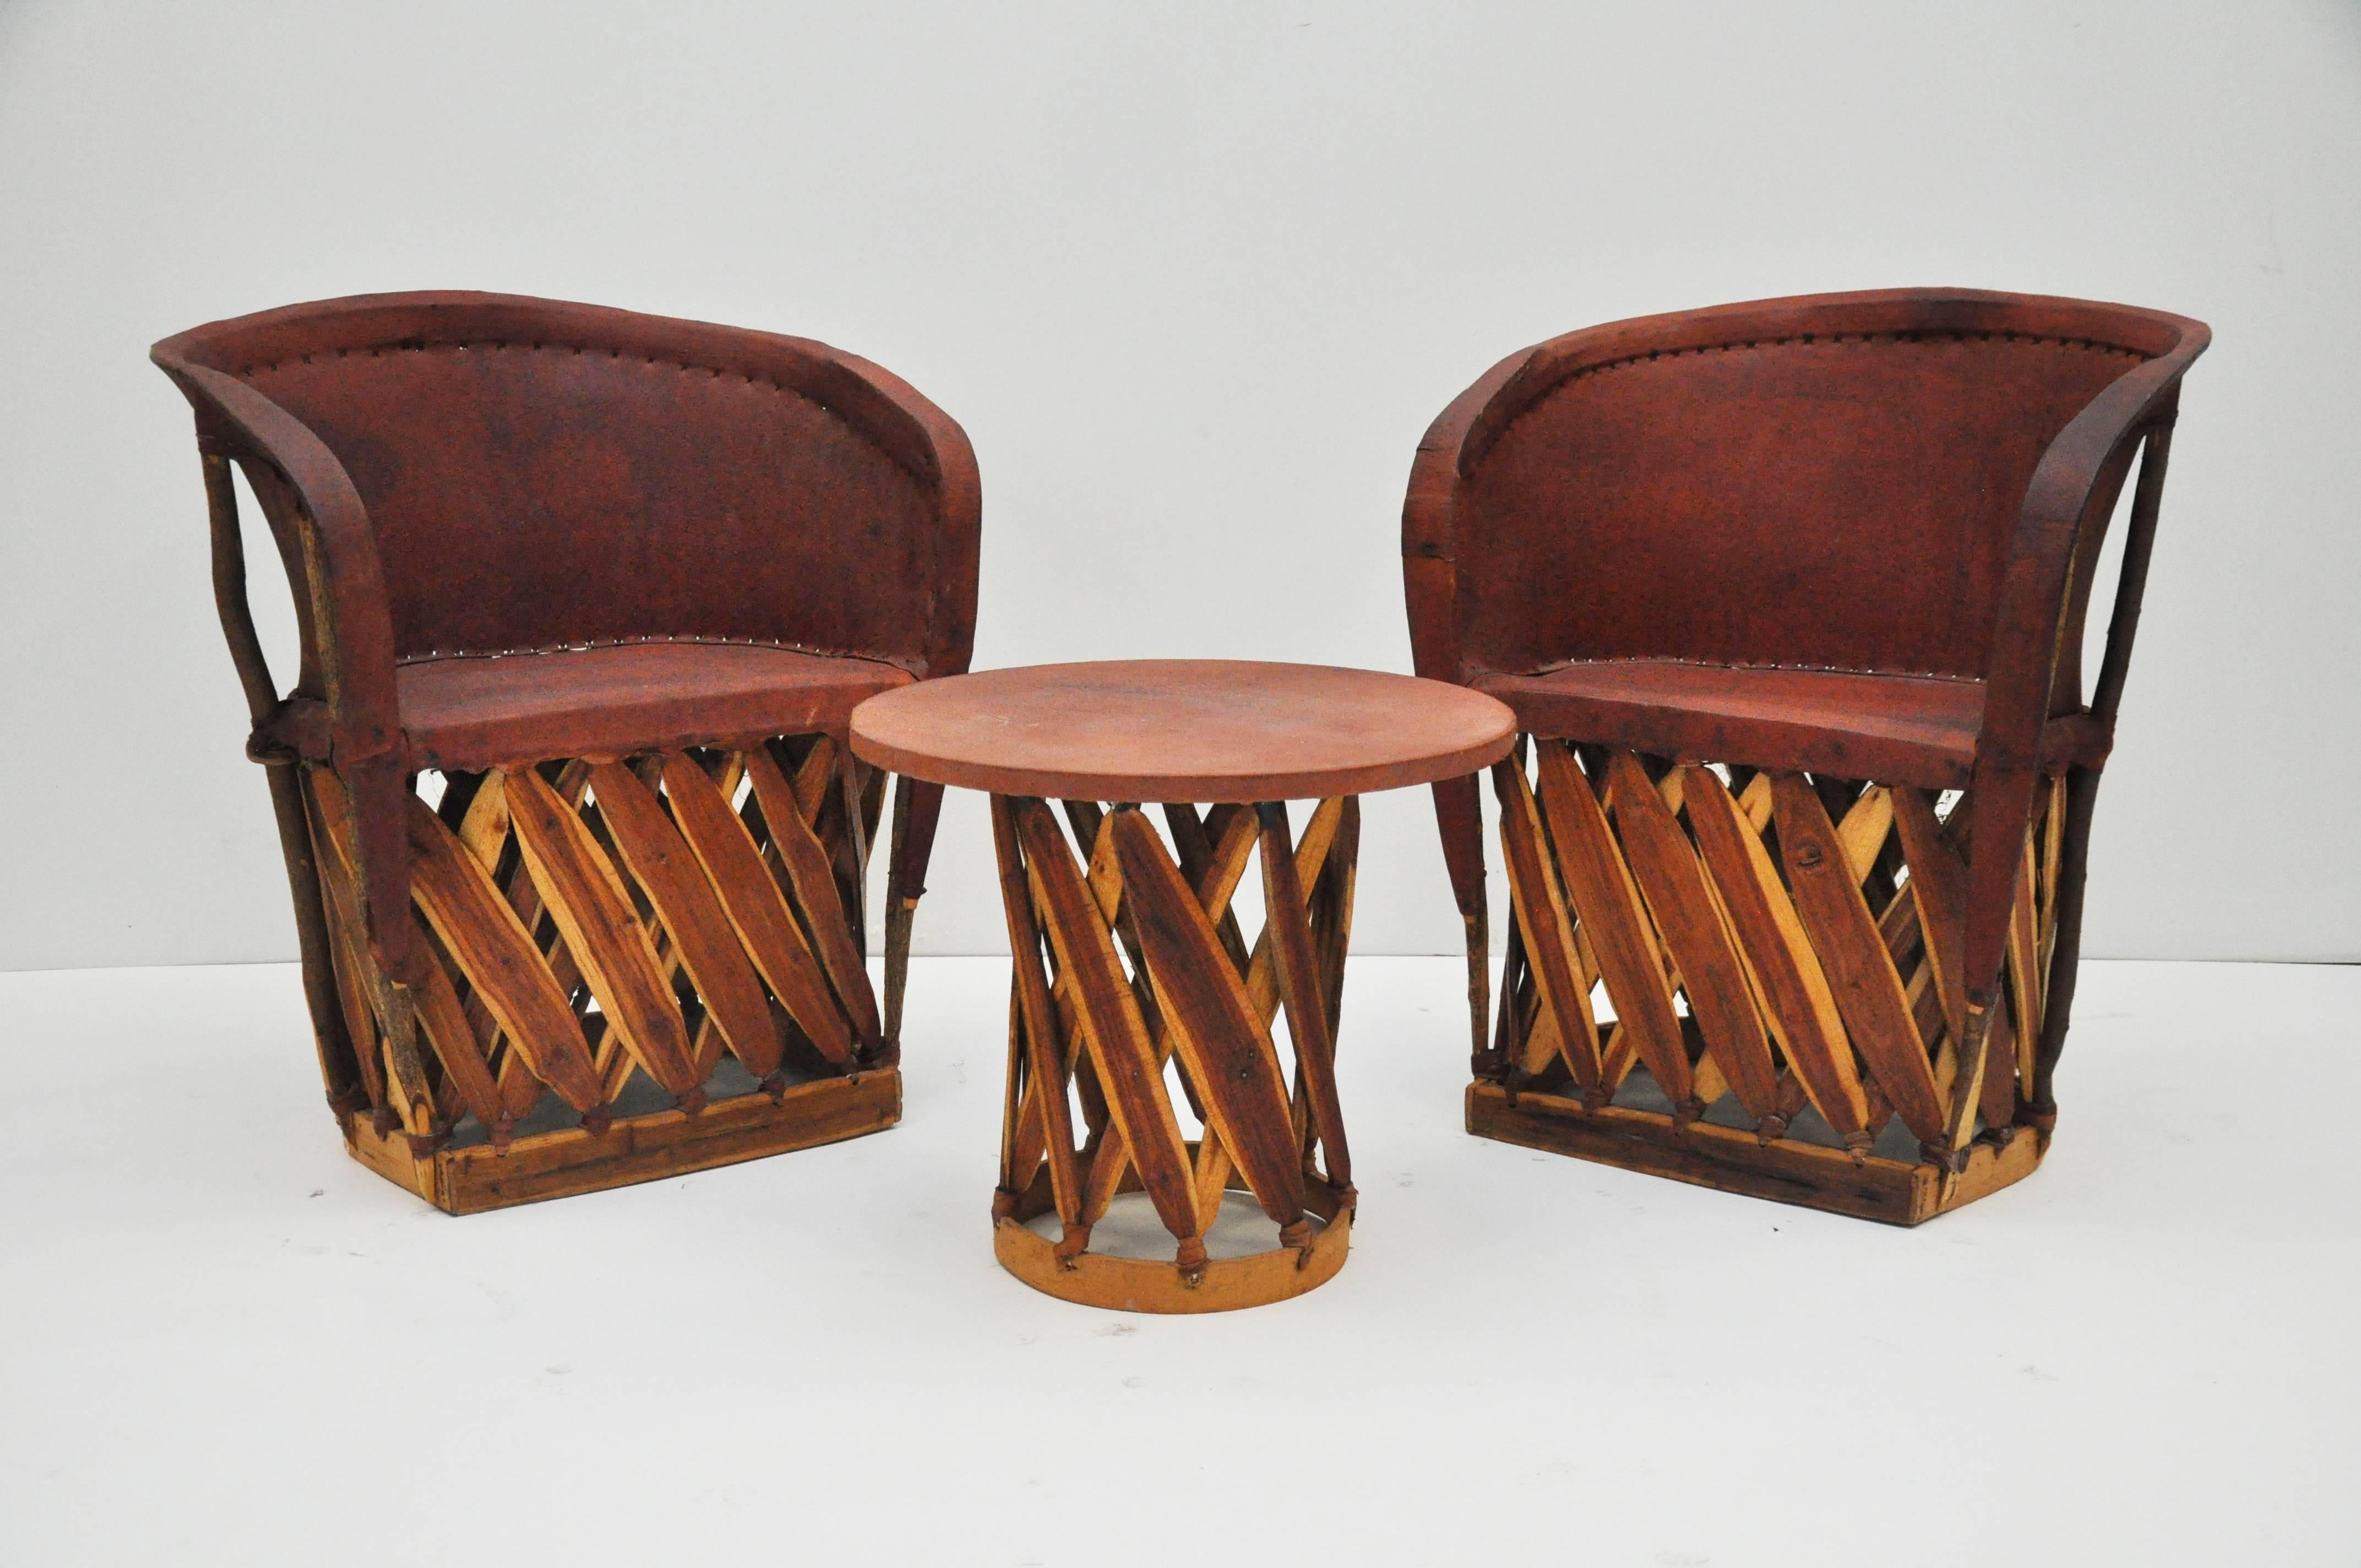 Handmade set of chairs and table are made from tanned pigskin and cedar strips. 
Table measures 20.5 